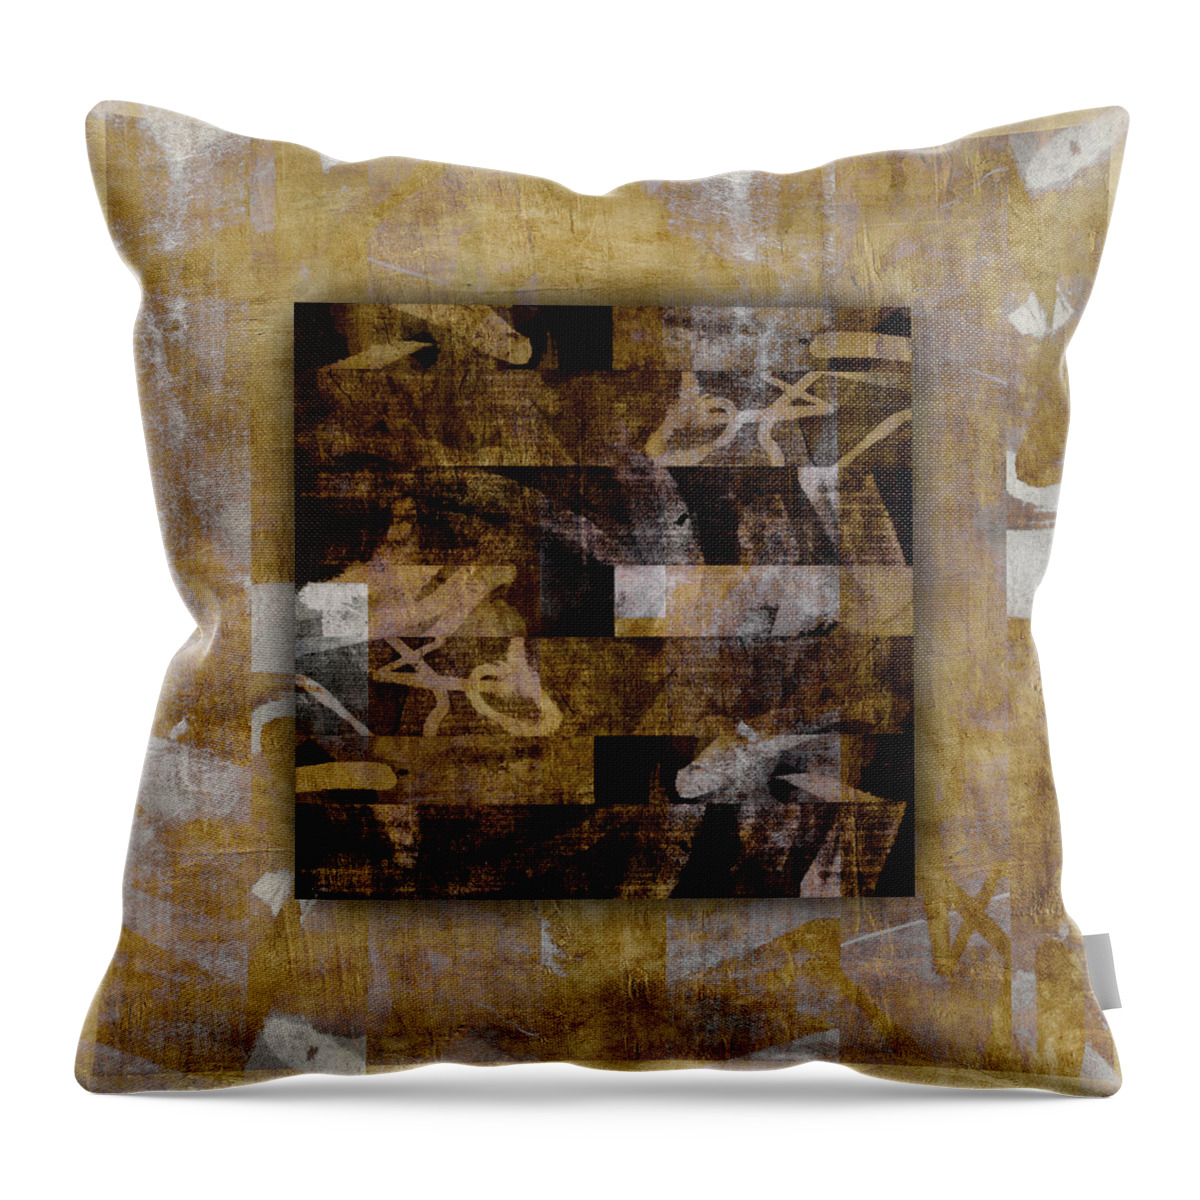 Tropical Throw Pillow featuring the photograph Tropical Panel Number Three by Carol Leigh